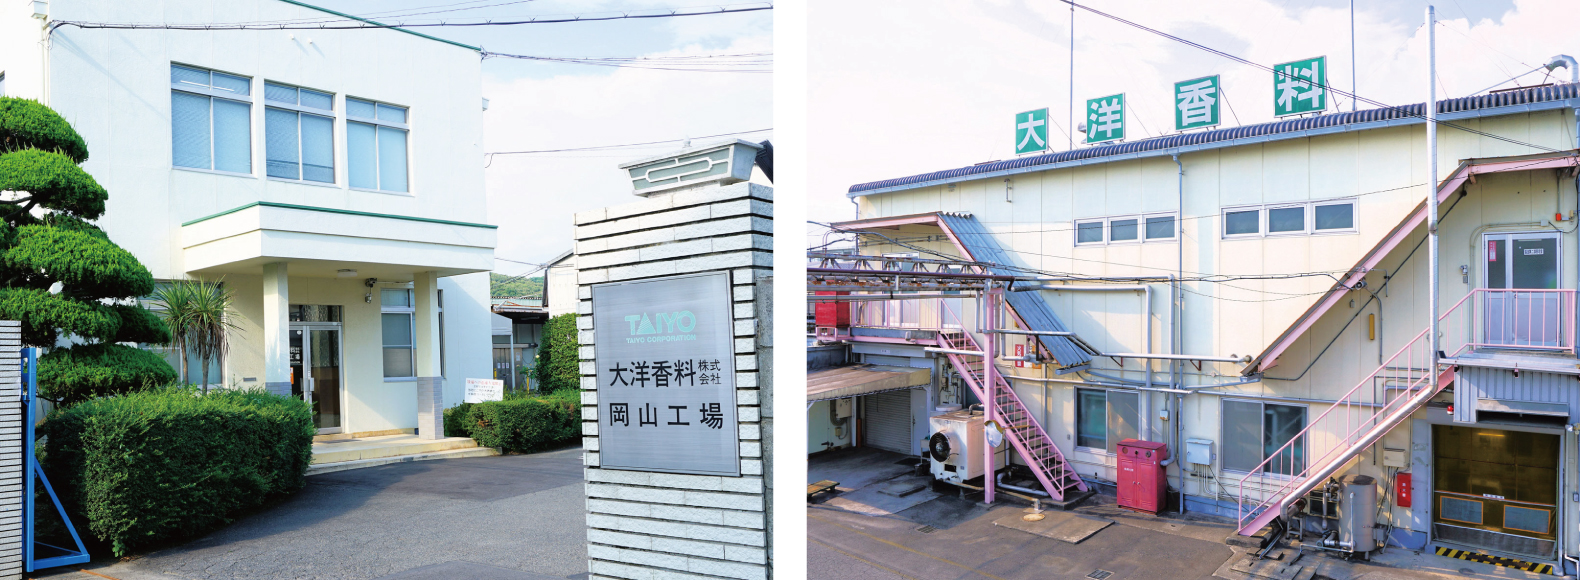 Okayama facotry　Main gate and Flavor manufacturing building